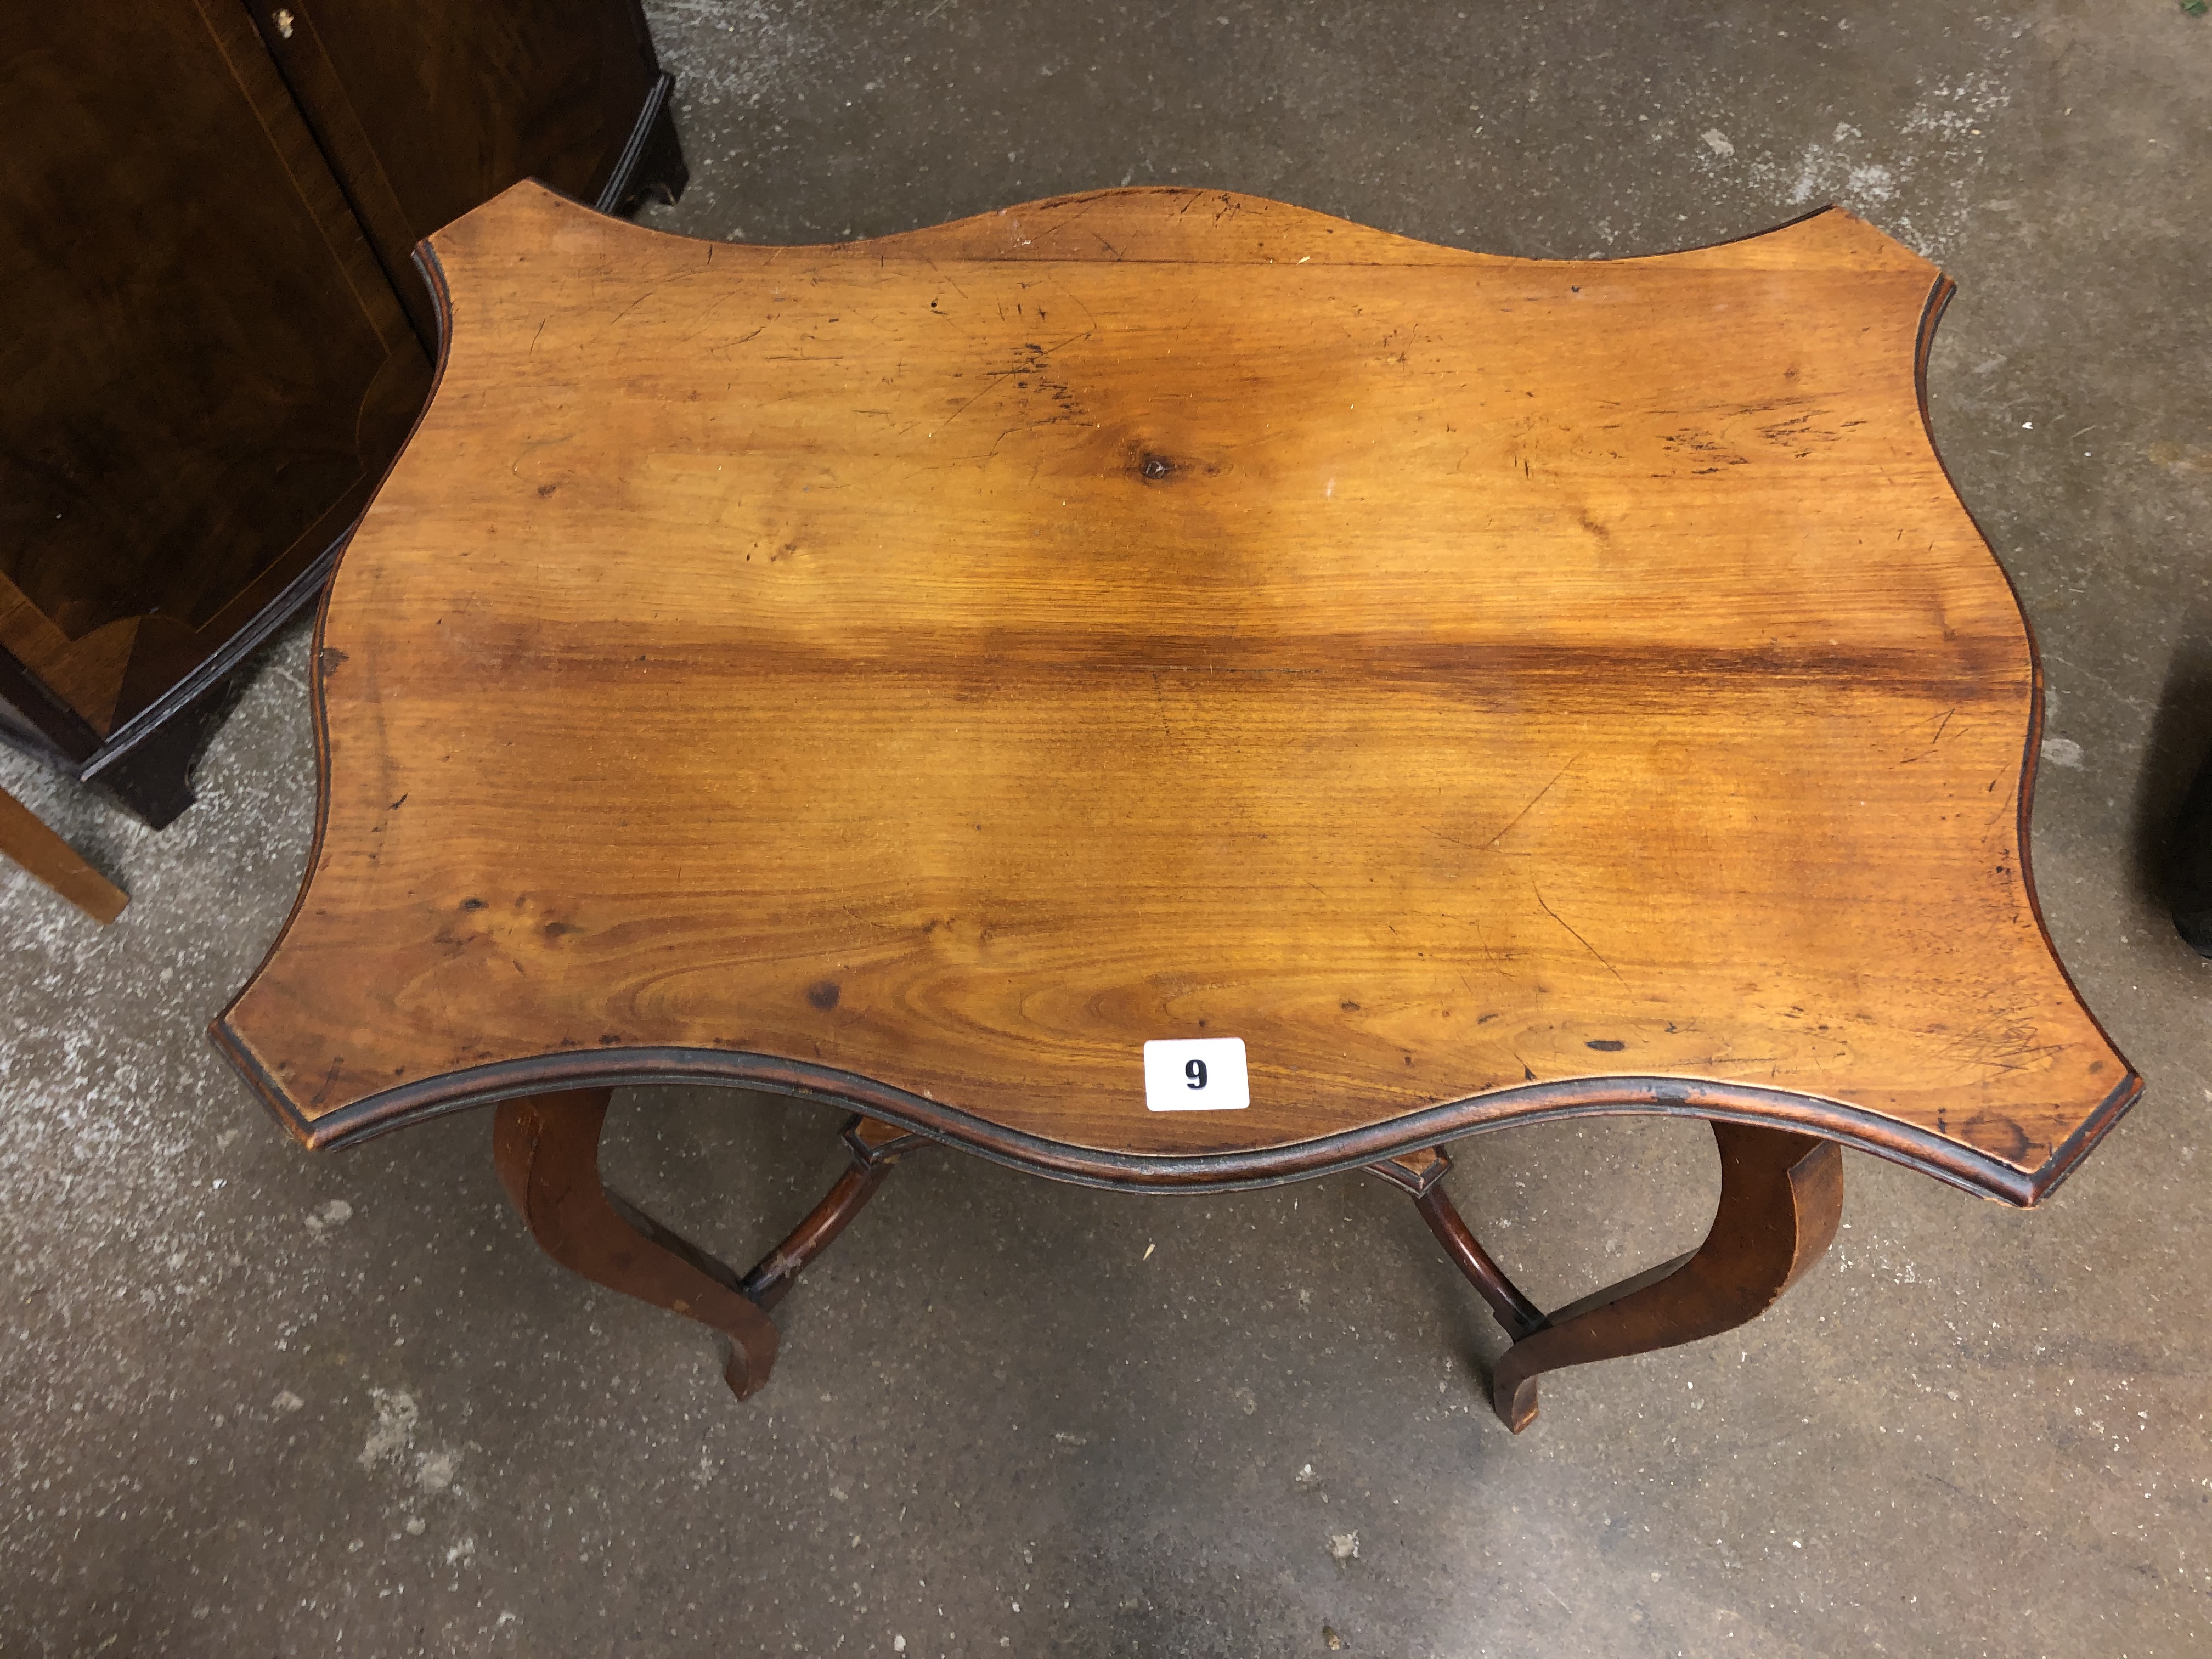 EDWARDIAN SERPENTINE SHAPED TABLE AND A MAHOGANY NEO CLASSICAL STYLE PLANTER TABLE - Image 2 of 4